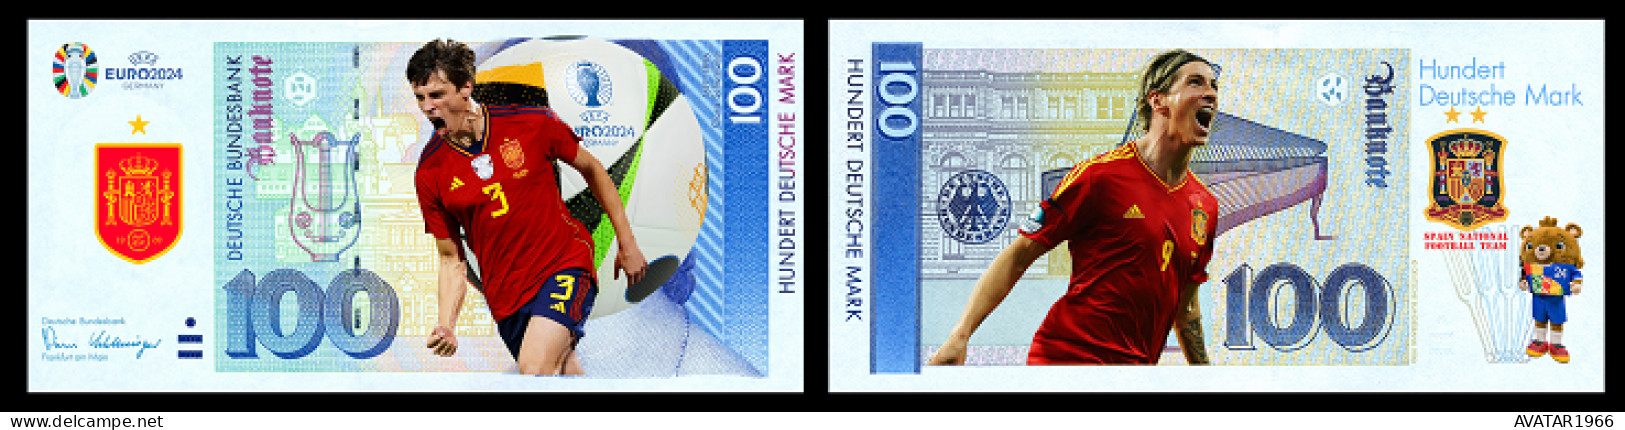 UEFA European Football Championship 2024 qualified country Spain  8 pieces Germany fantasy paper money